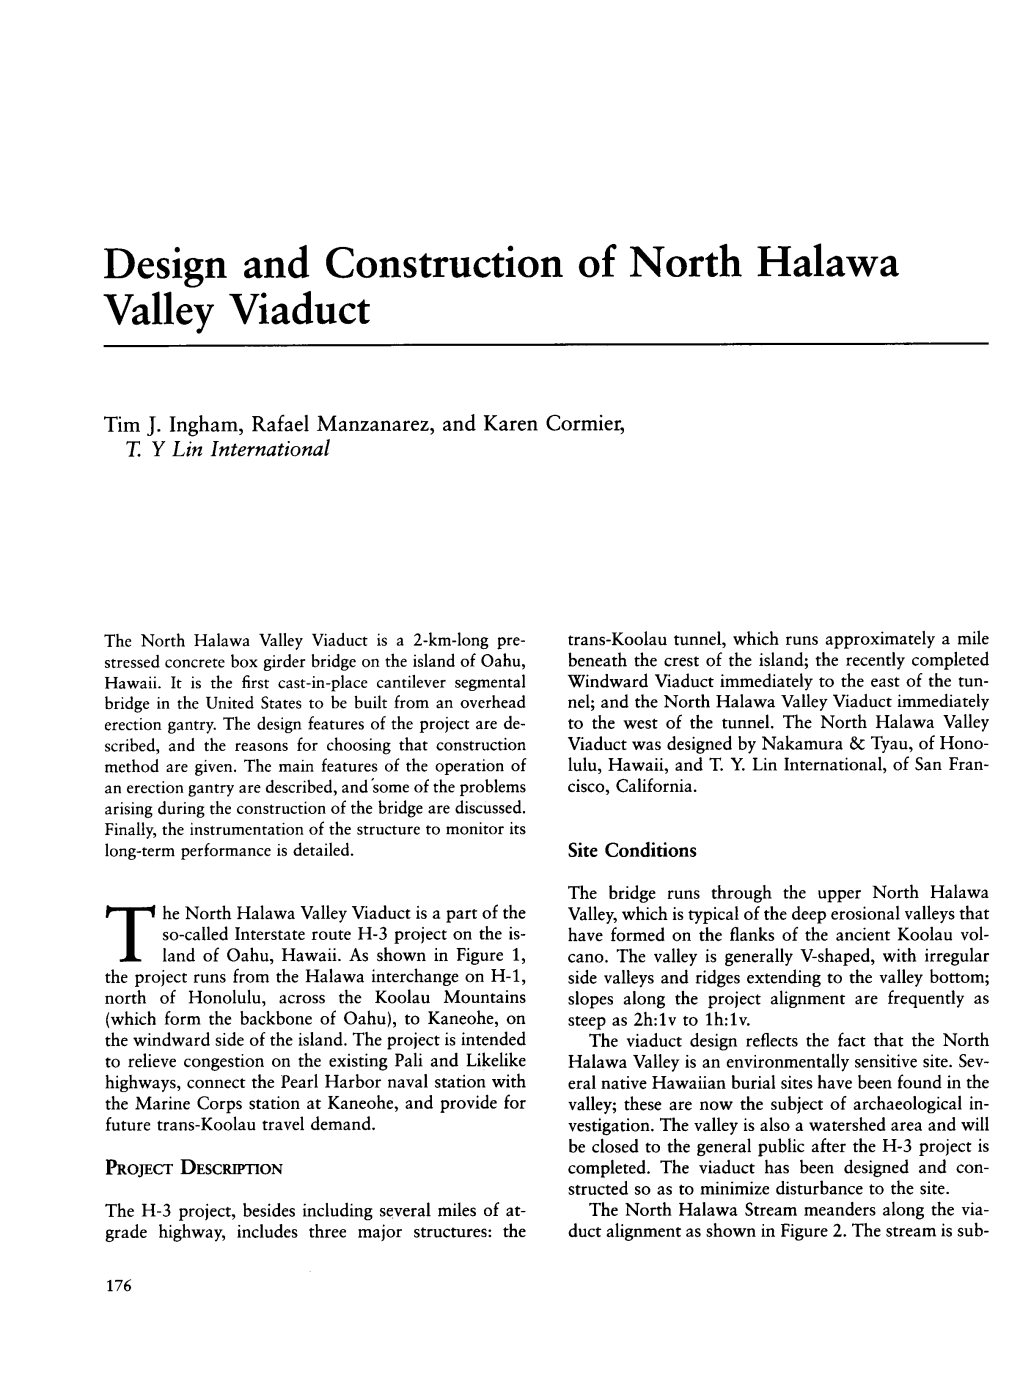 Design and Construction of North Halawa Valley Viaduct